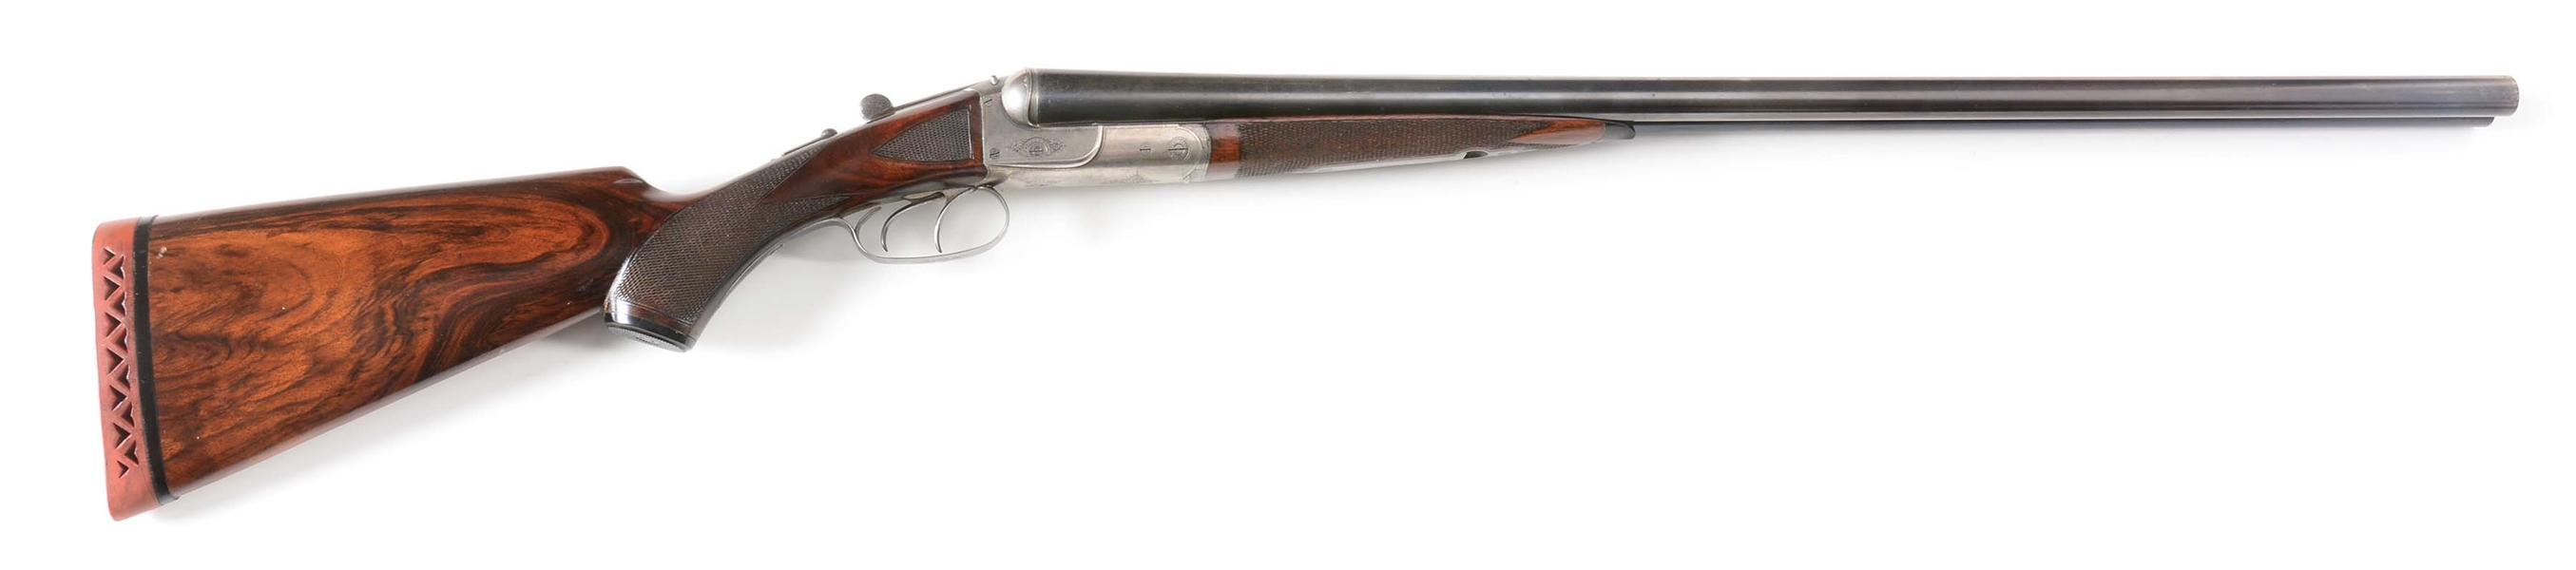 (C) CHARLES DALY SIDE BY SIDE SHOTGUN, LIKELY MADE BY J.P. SAUER.